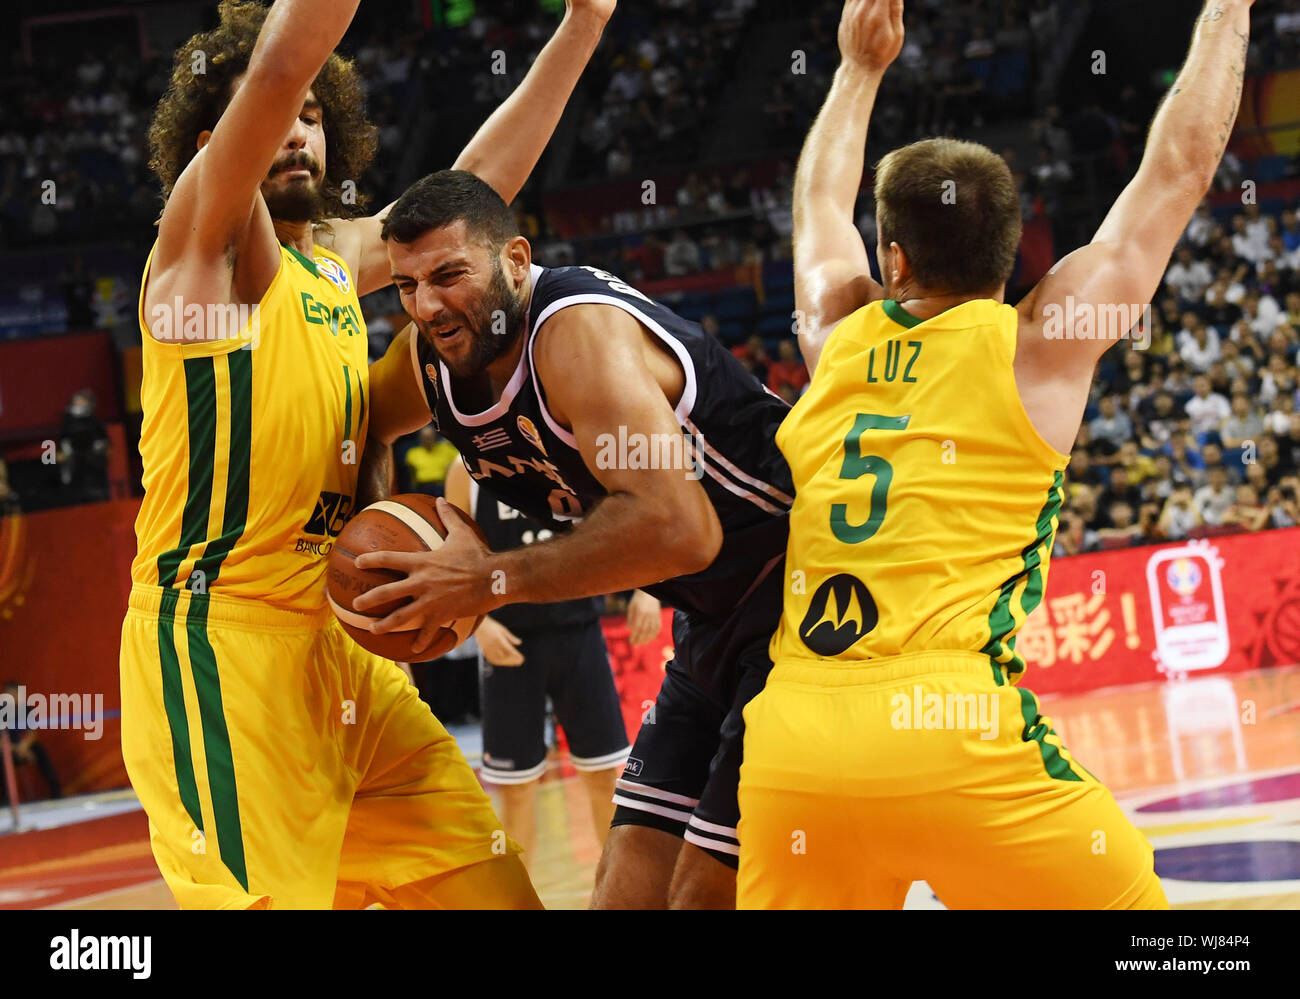 Nanjing, China's Jiangsu Province. 3rd Sep, 2019. Ioannis Bourousis (C) of  Greece breaks through past Rafa Luz (R) and Anderson Varejao of Brazil  during the group F match between Greece and Brazil